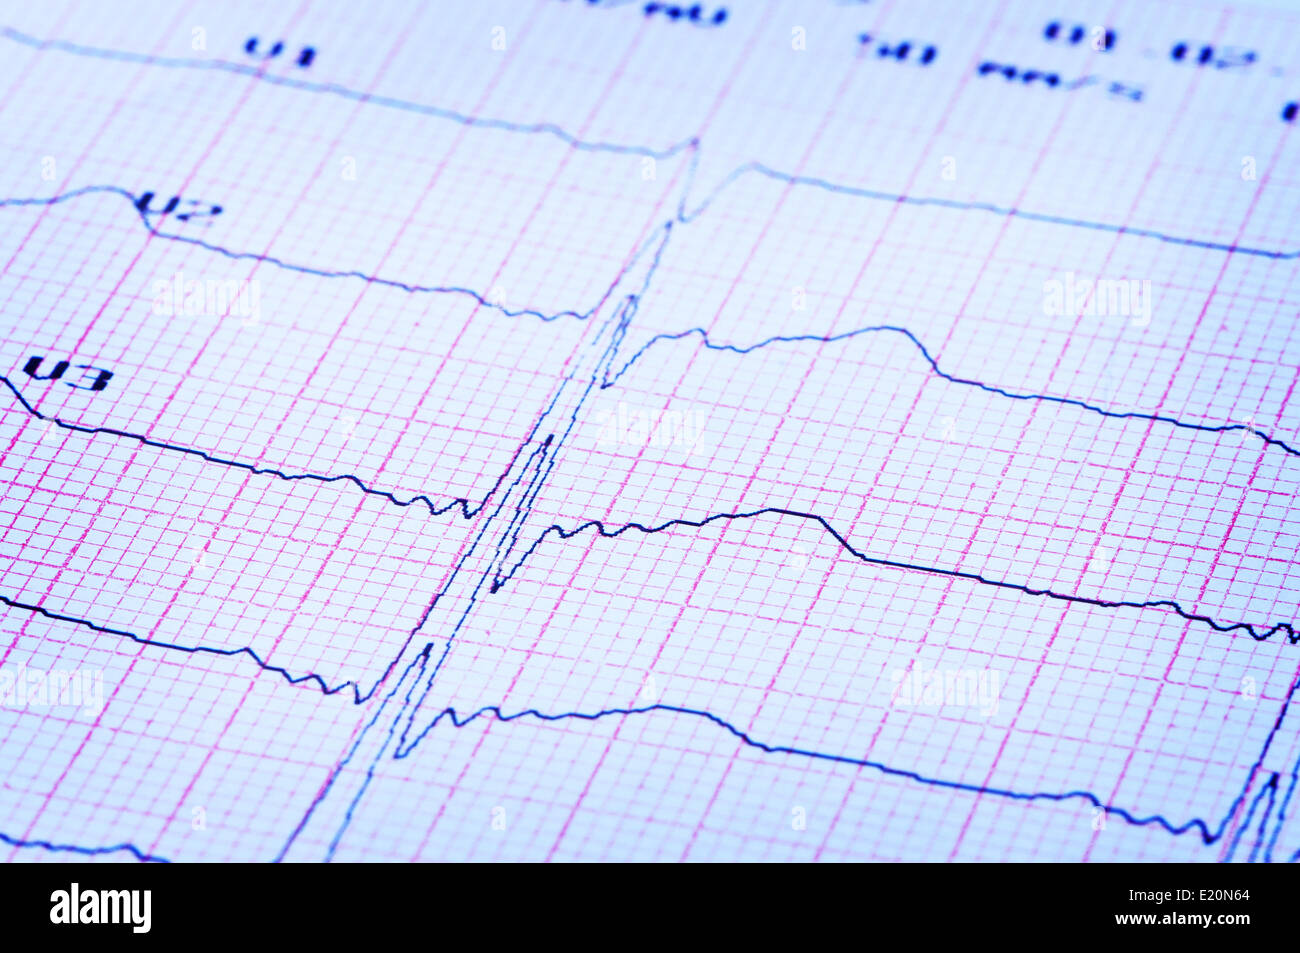 Cardiogram of heart on paper. Stock Photo